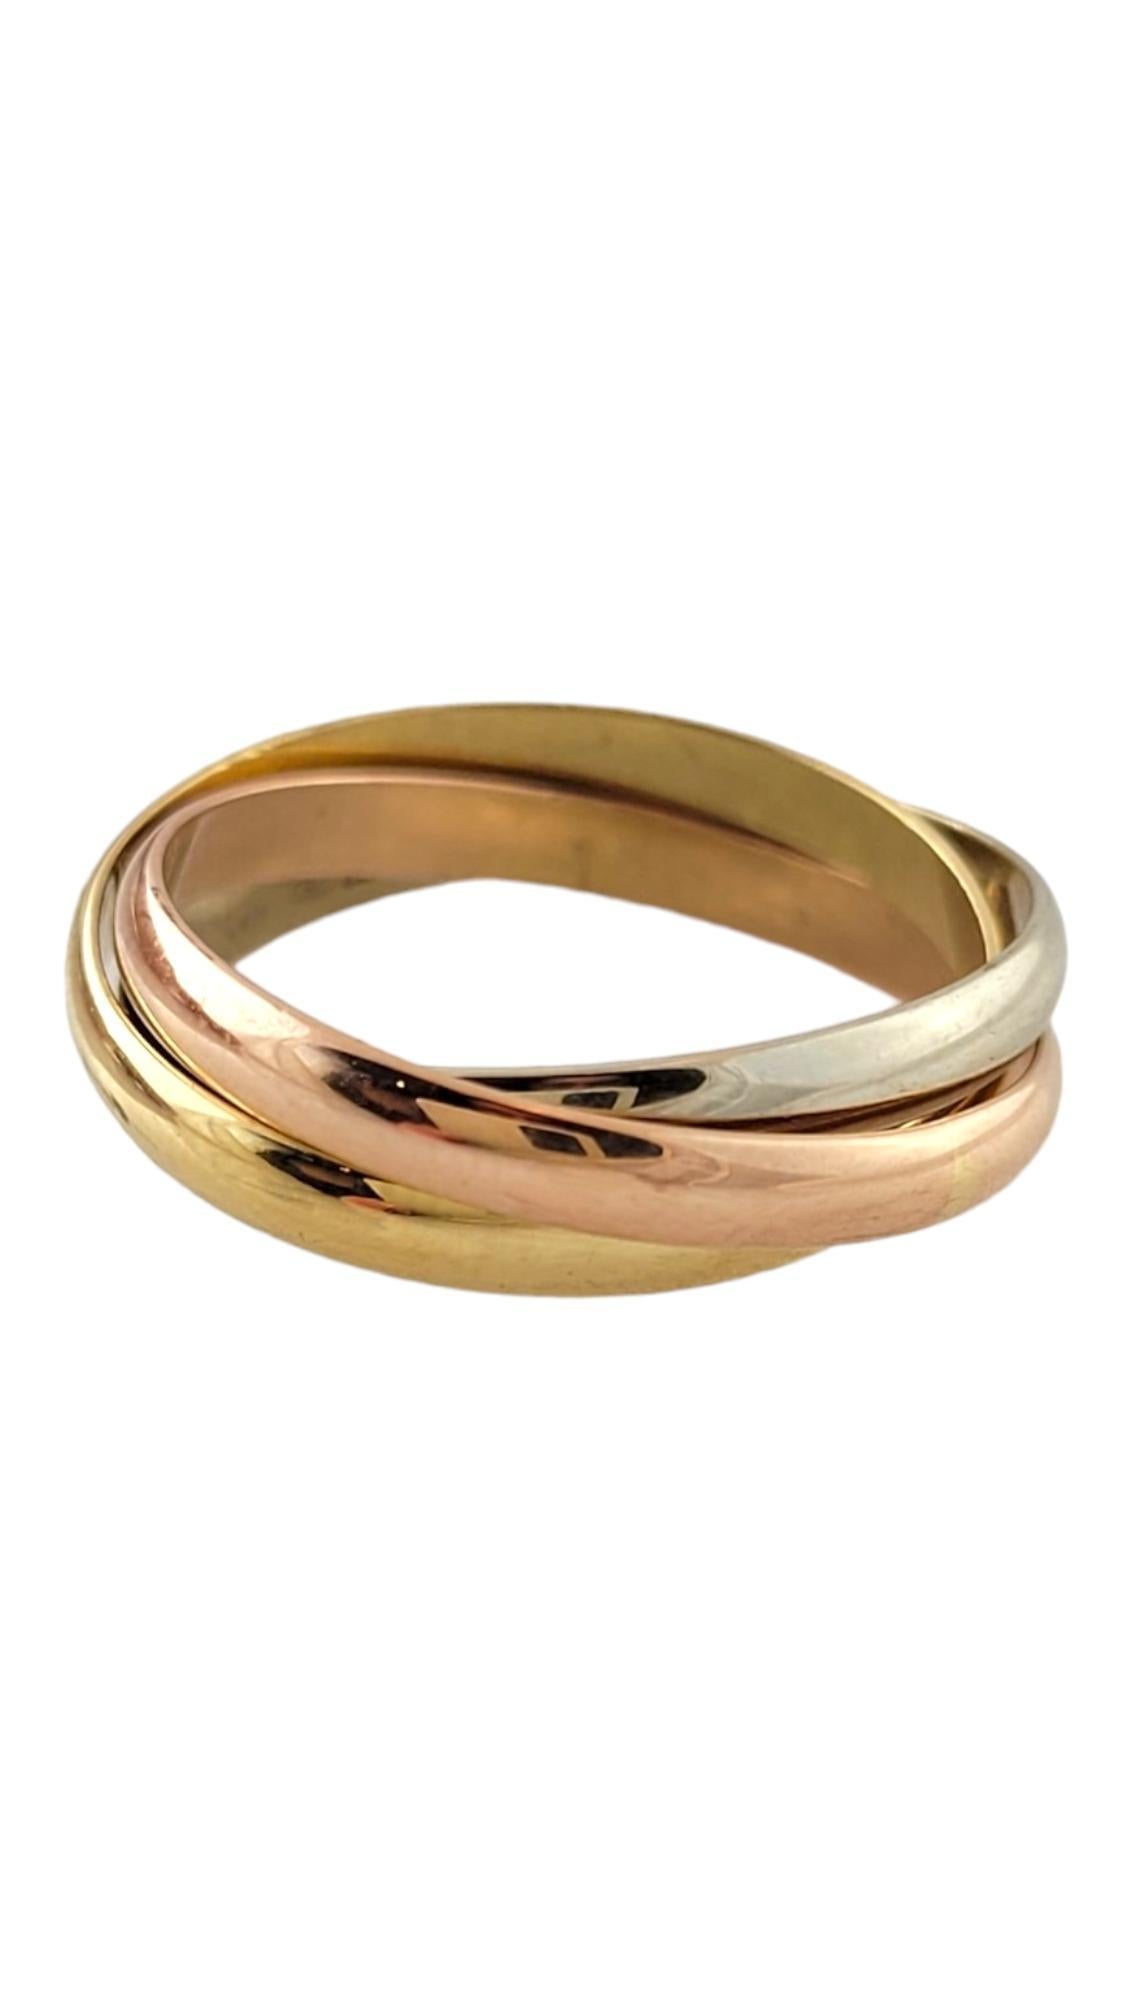 18K Tri Colored Rolling 3 Band Ring Size 11.25

This beautiful 3 band rolling ring features an 18K yellow gold band, white gold band, and rose gold band!

Ring size: 11.25
Shank: 2.85mm (each band)

Weight: 4.66 dwt/ 7.24 g

Hallmark: 750 110